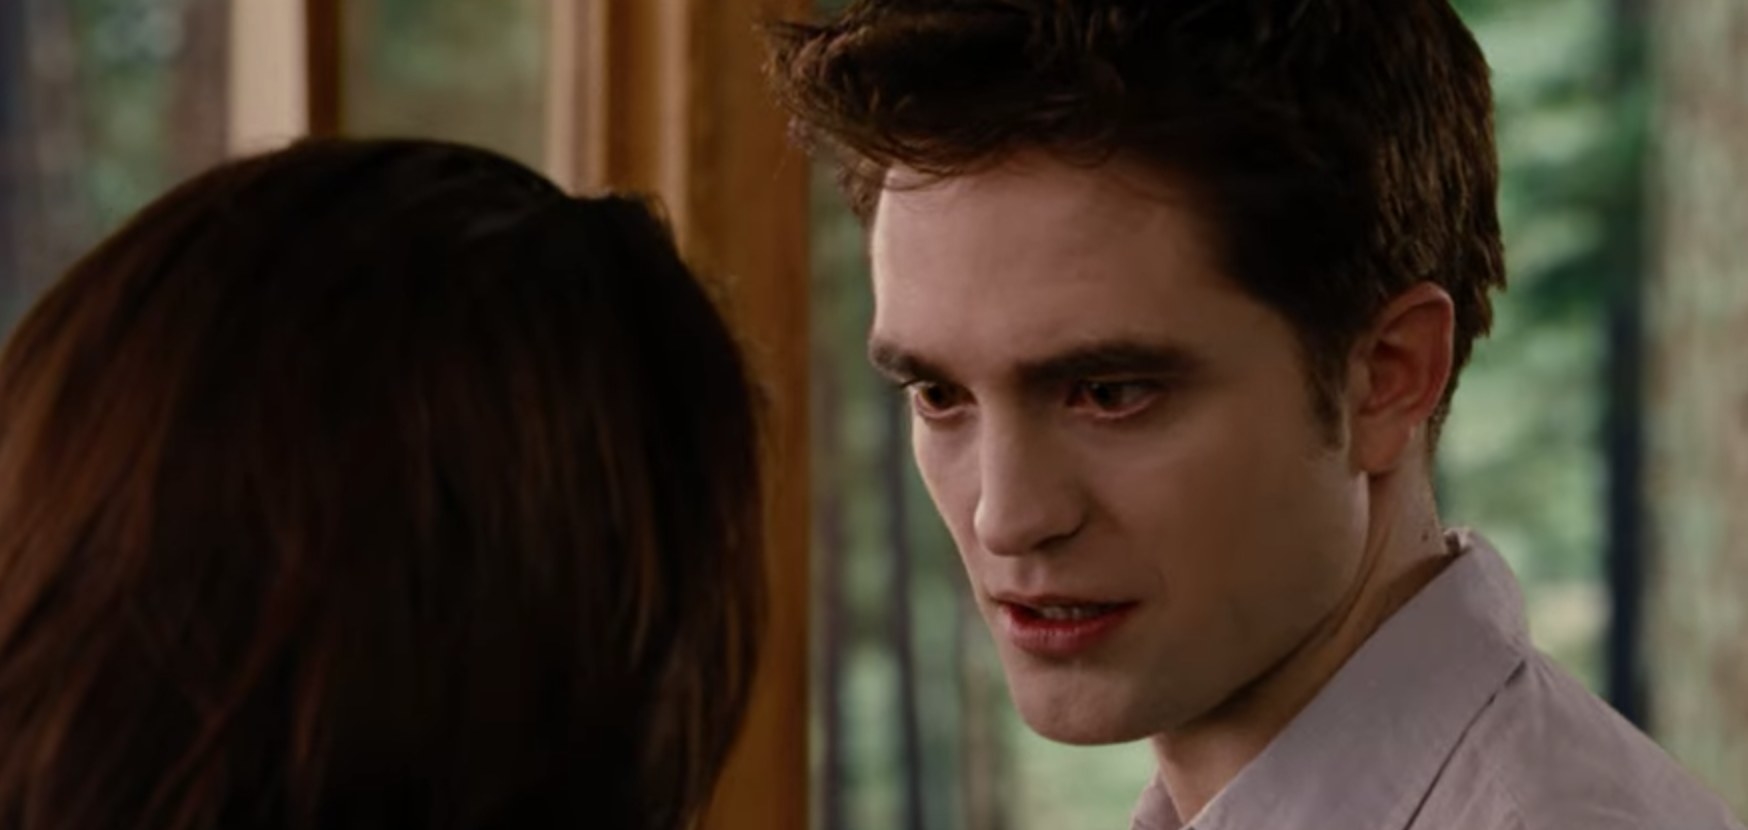 Edward furrows his brows angrily as he looks down at Bella.